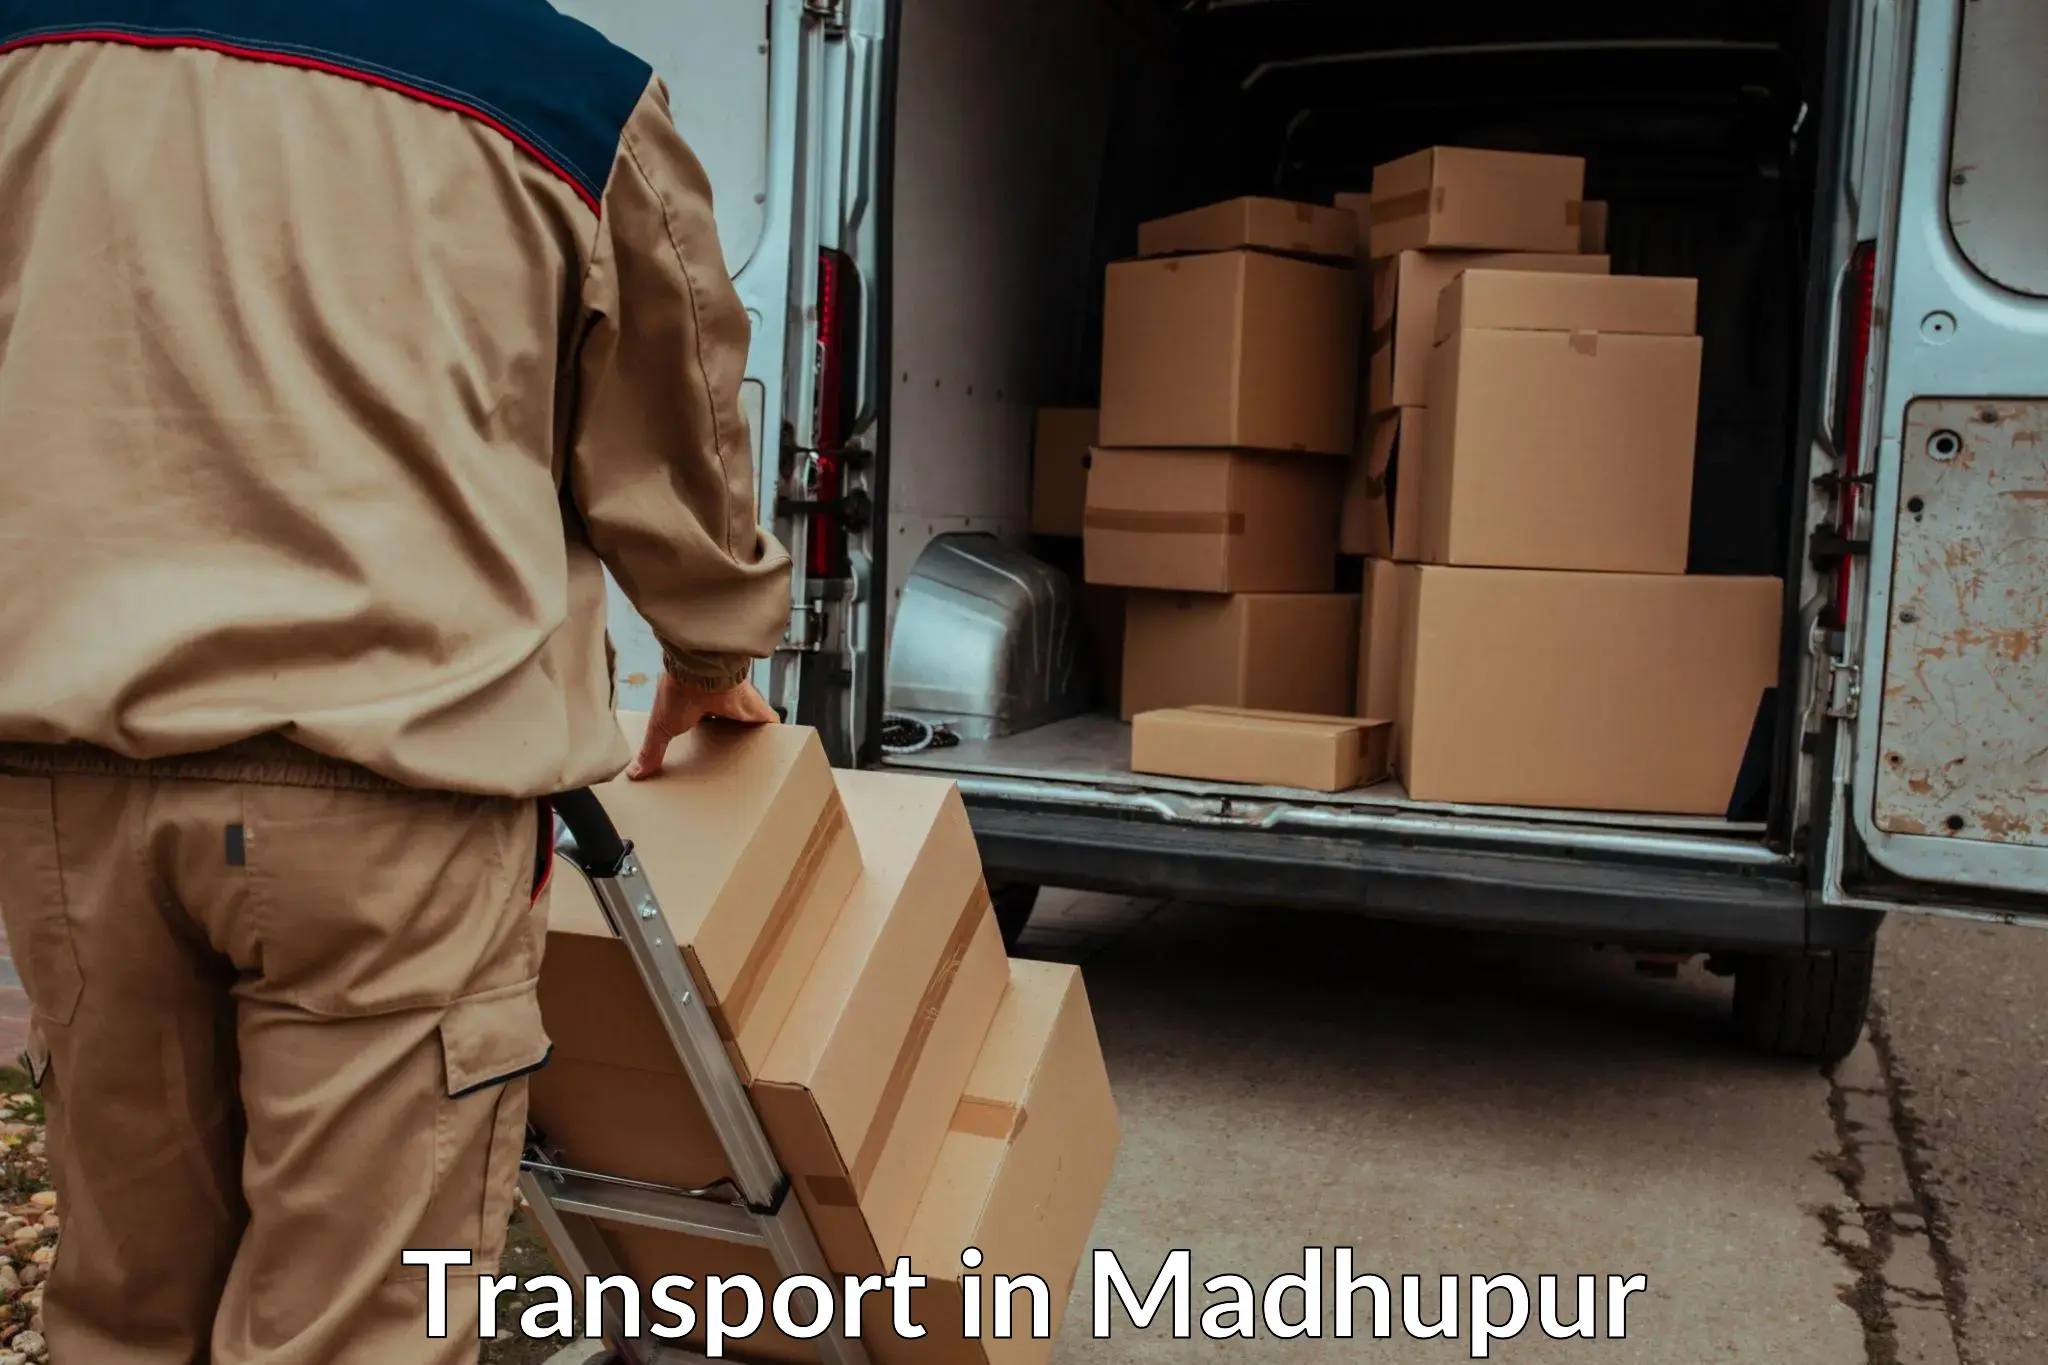 Pick up transport service in Madhupur